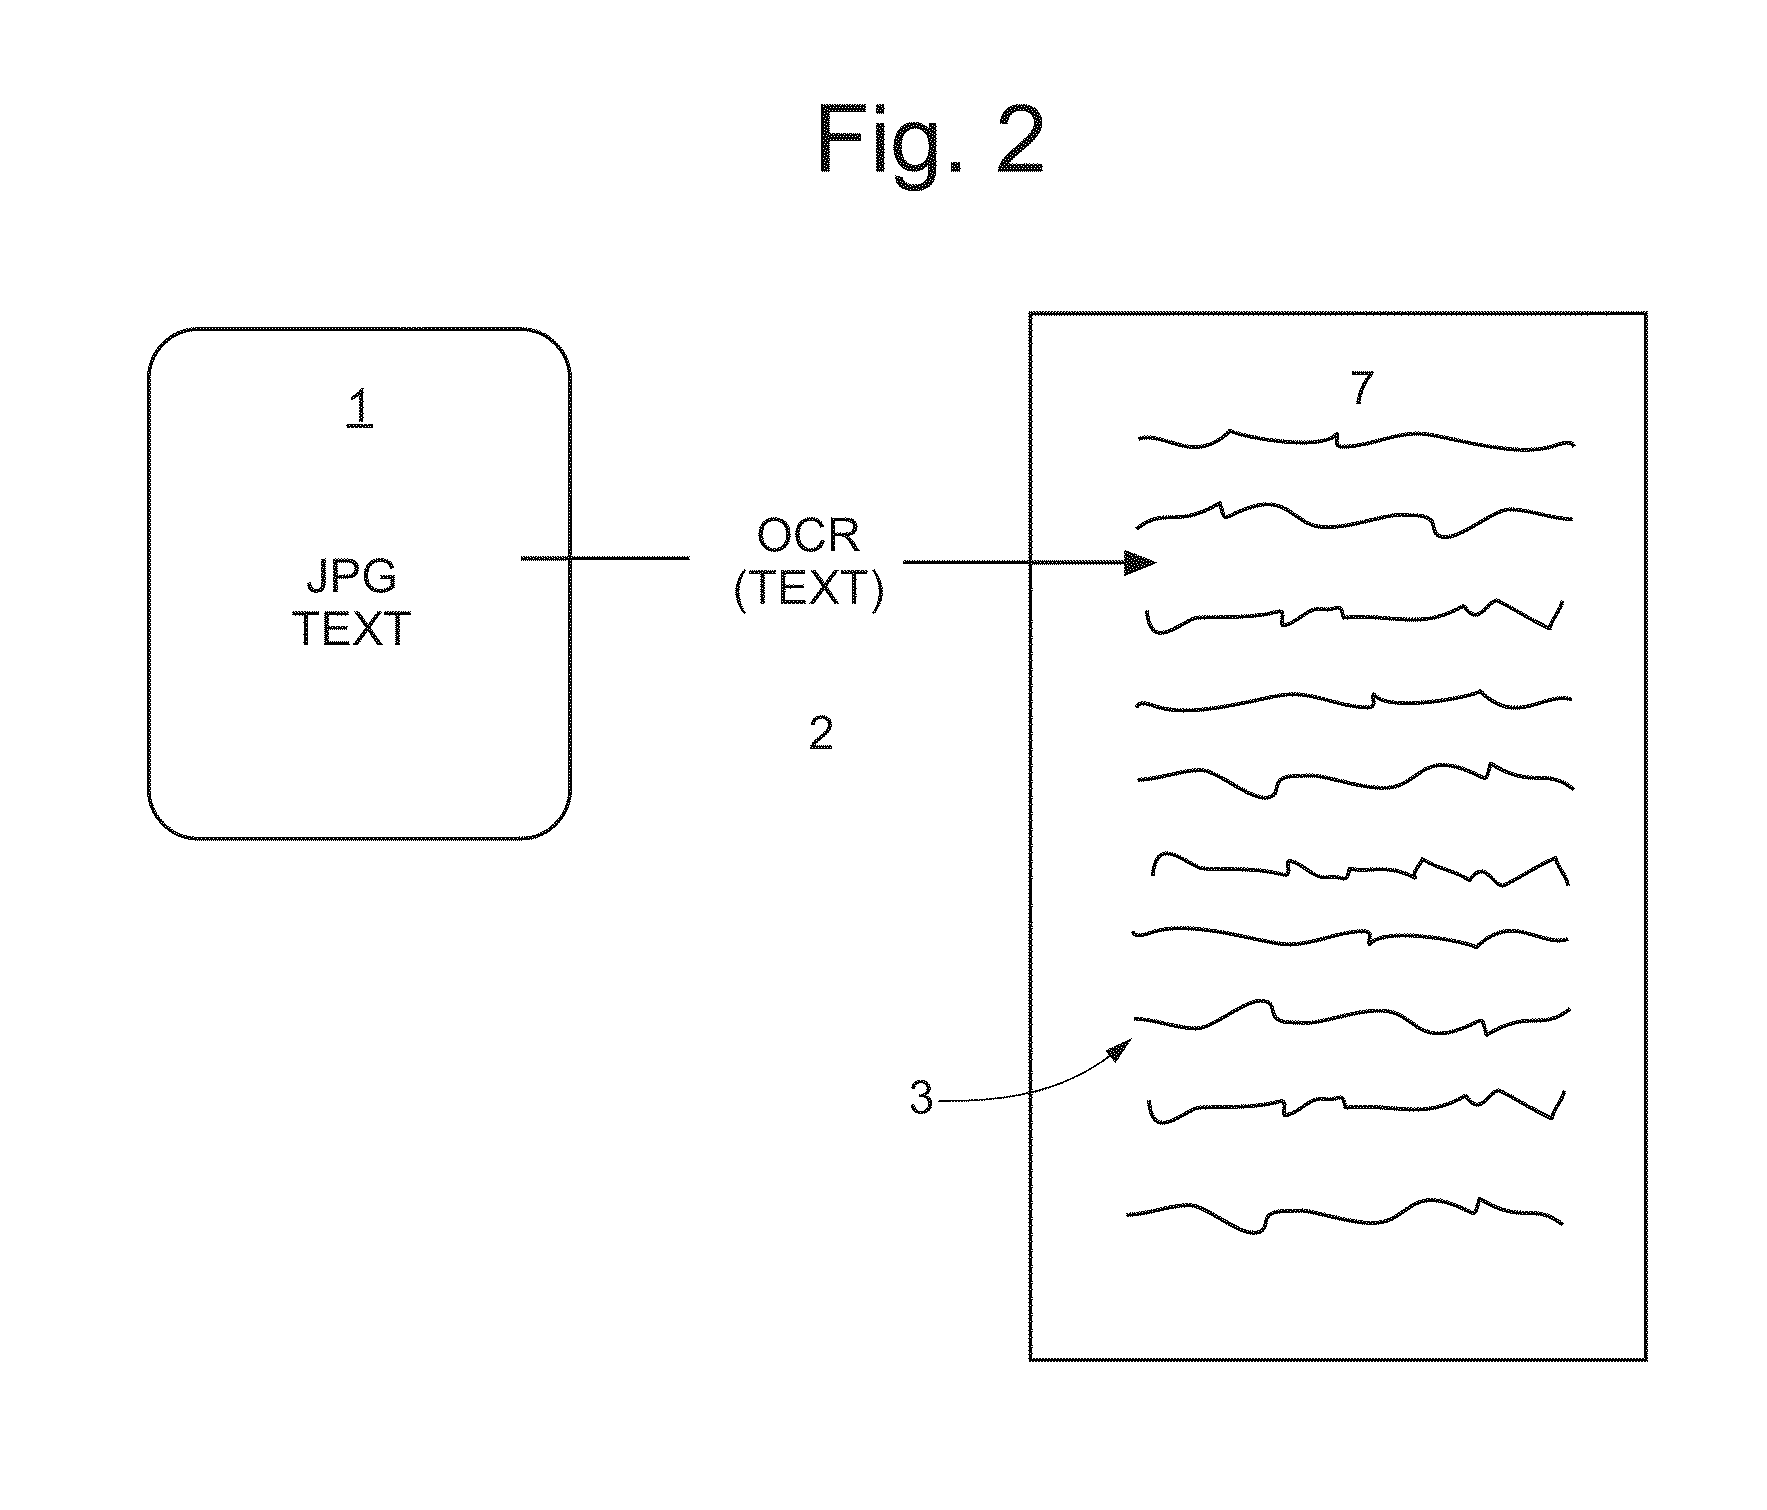 Parking information collection system and method